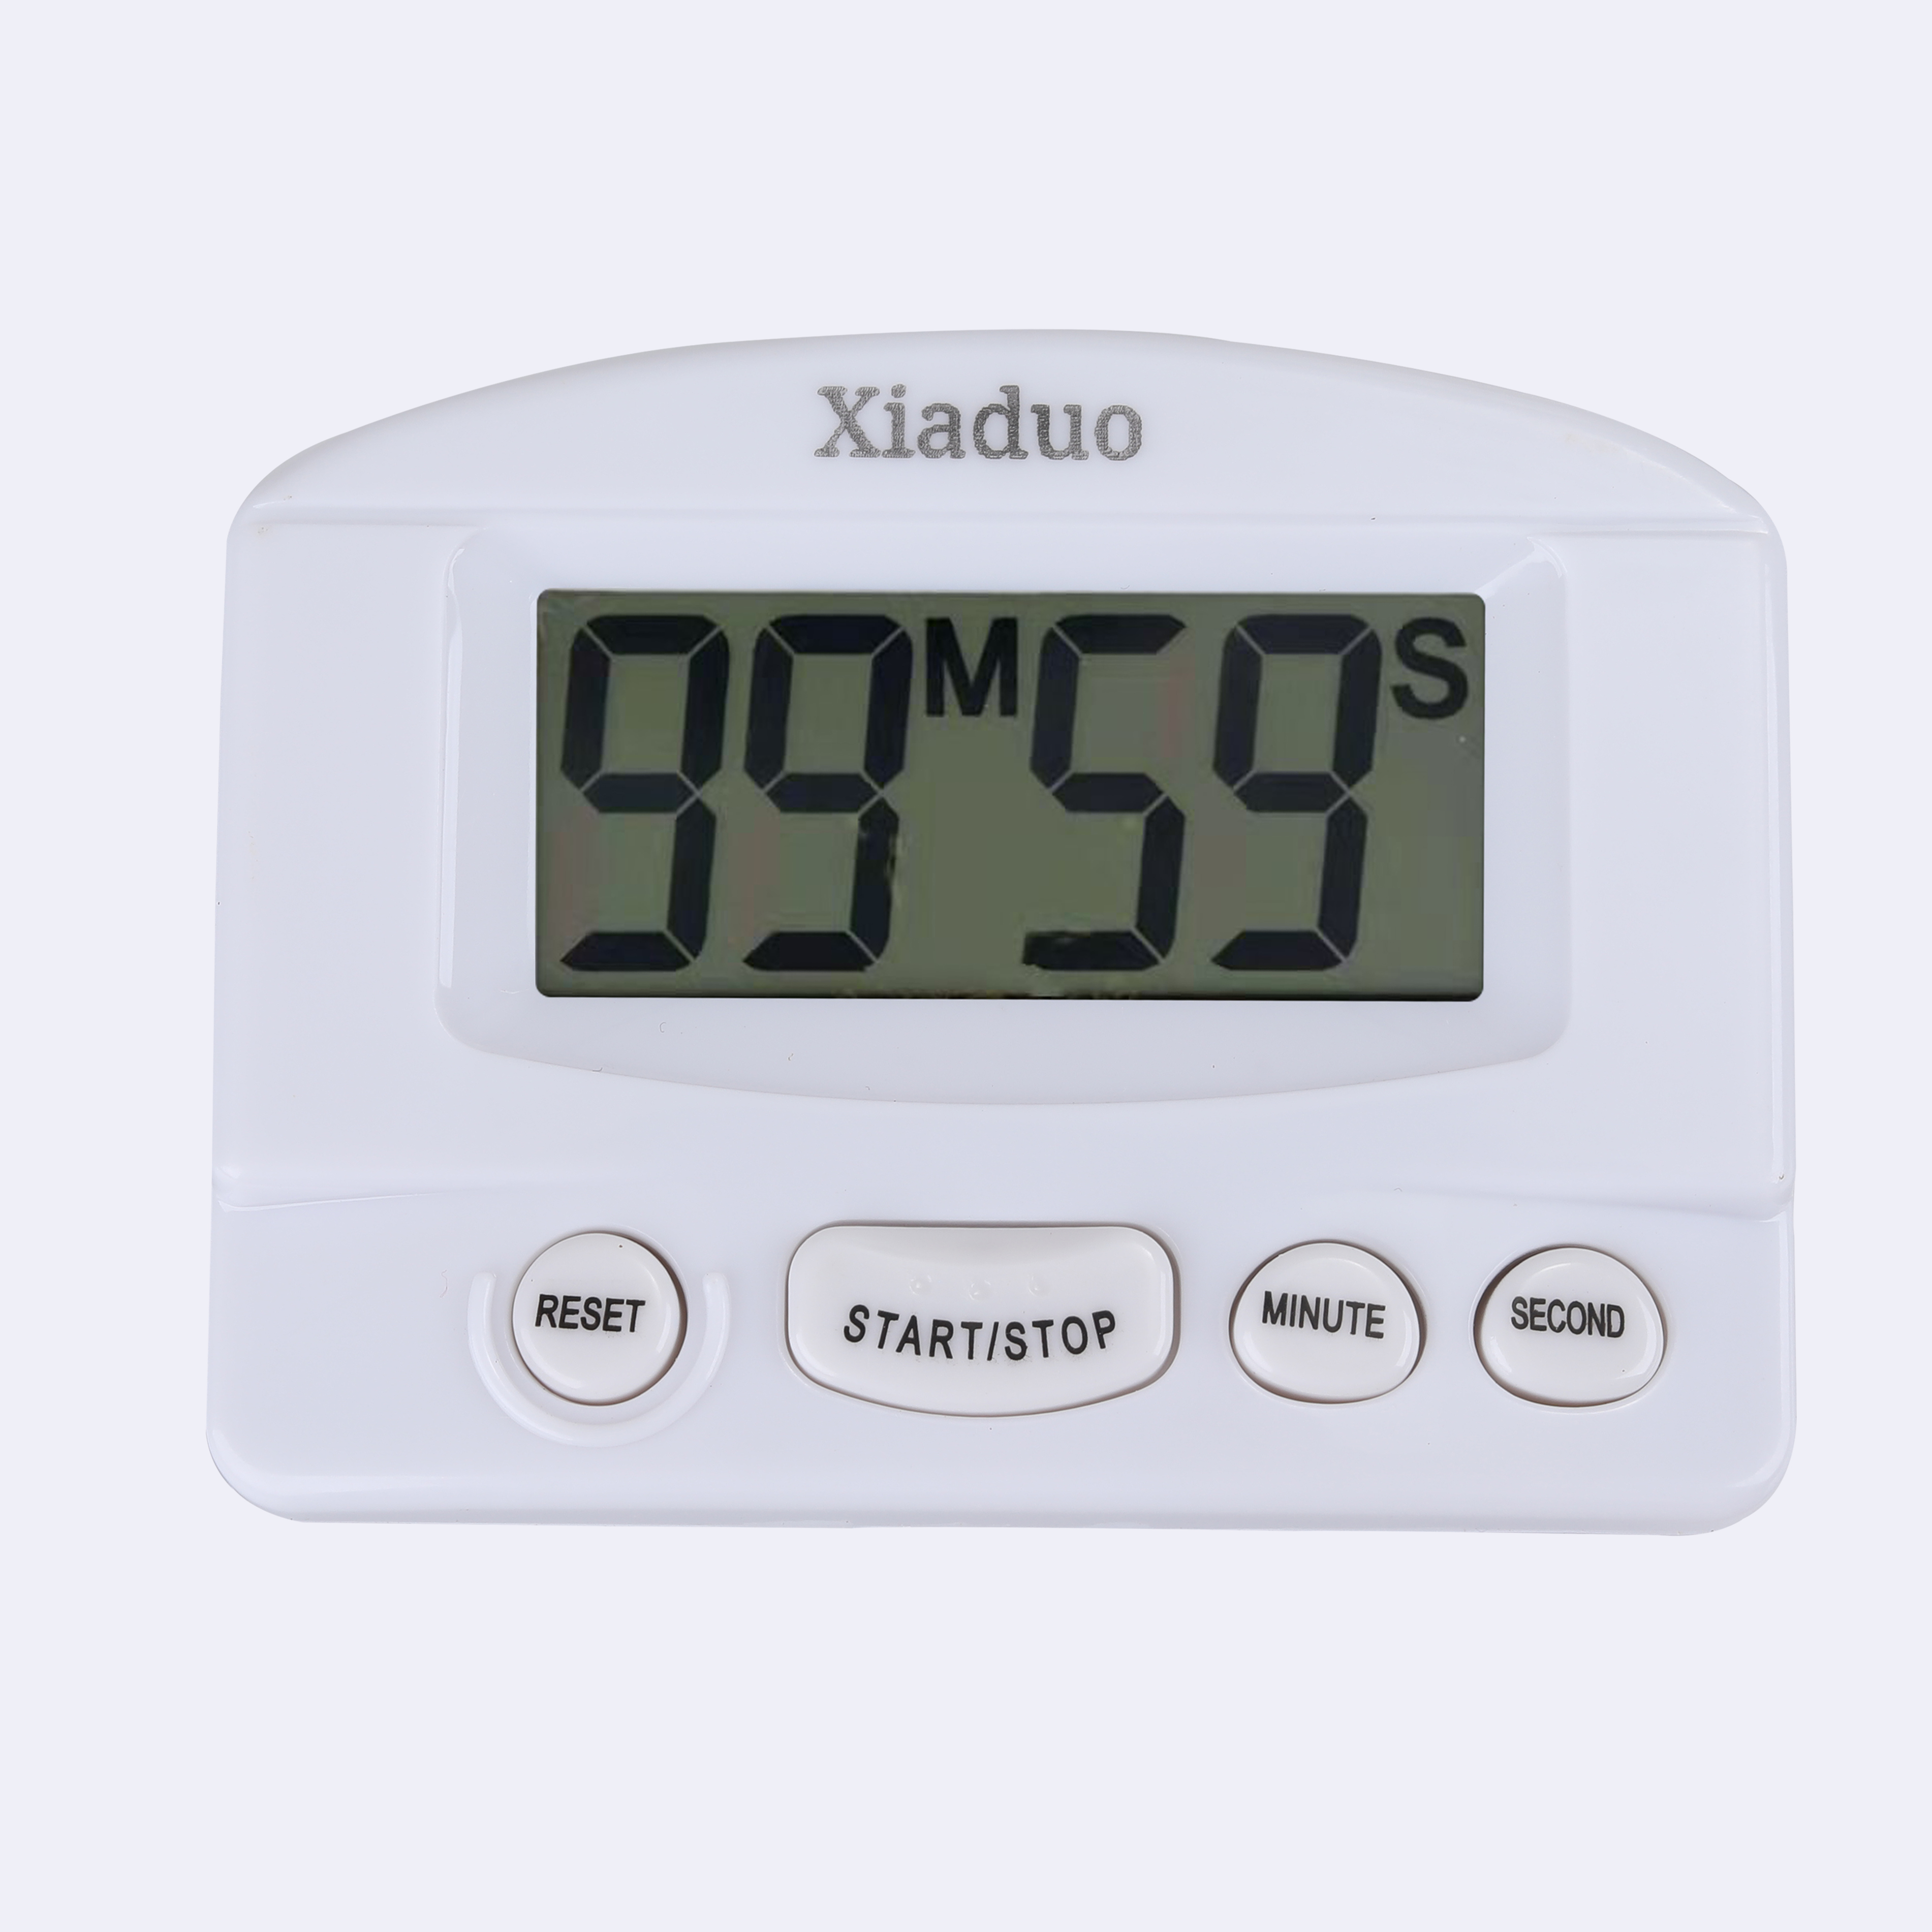 Xiaduo Multi-Function Digital Chronographs with Magnetic Backing, Stand, Loud Alarm, for Kitchen, Study, Work, Exercise Training, Outdoor Activities(not Including Battery).